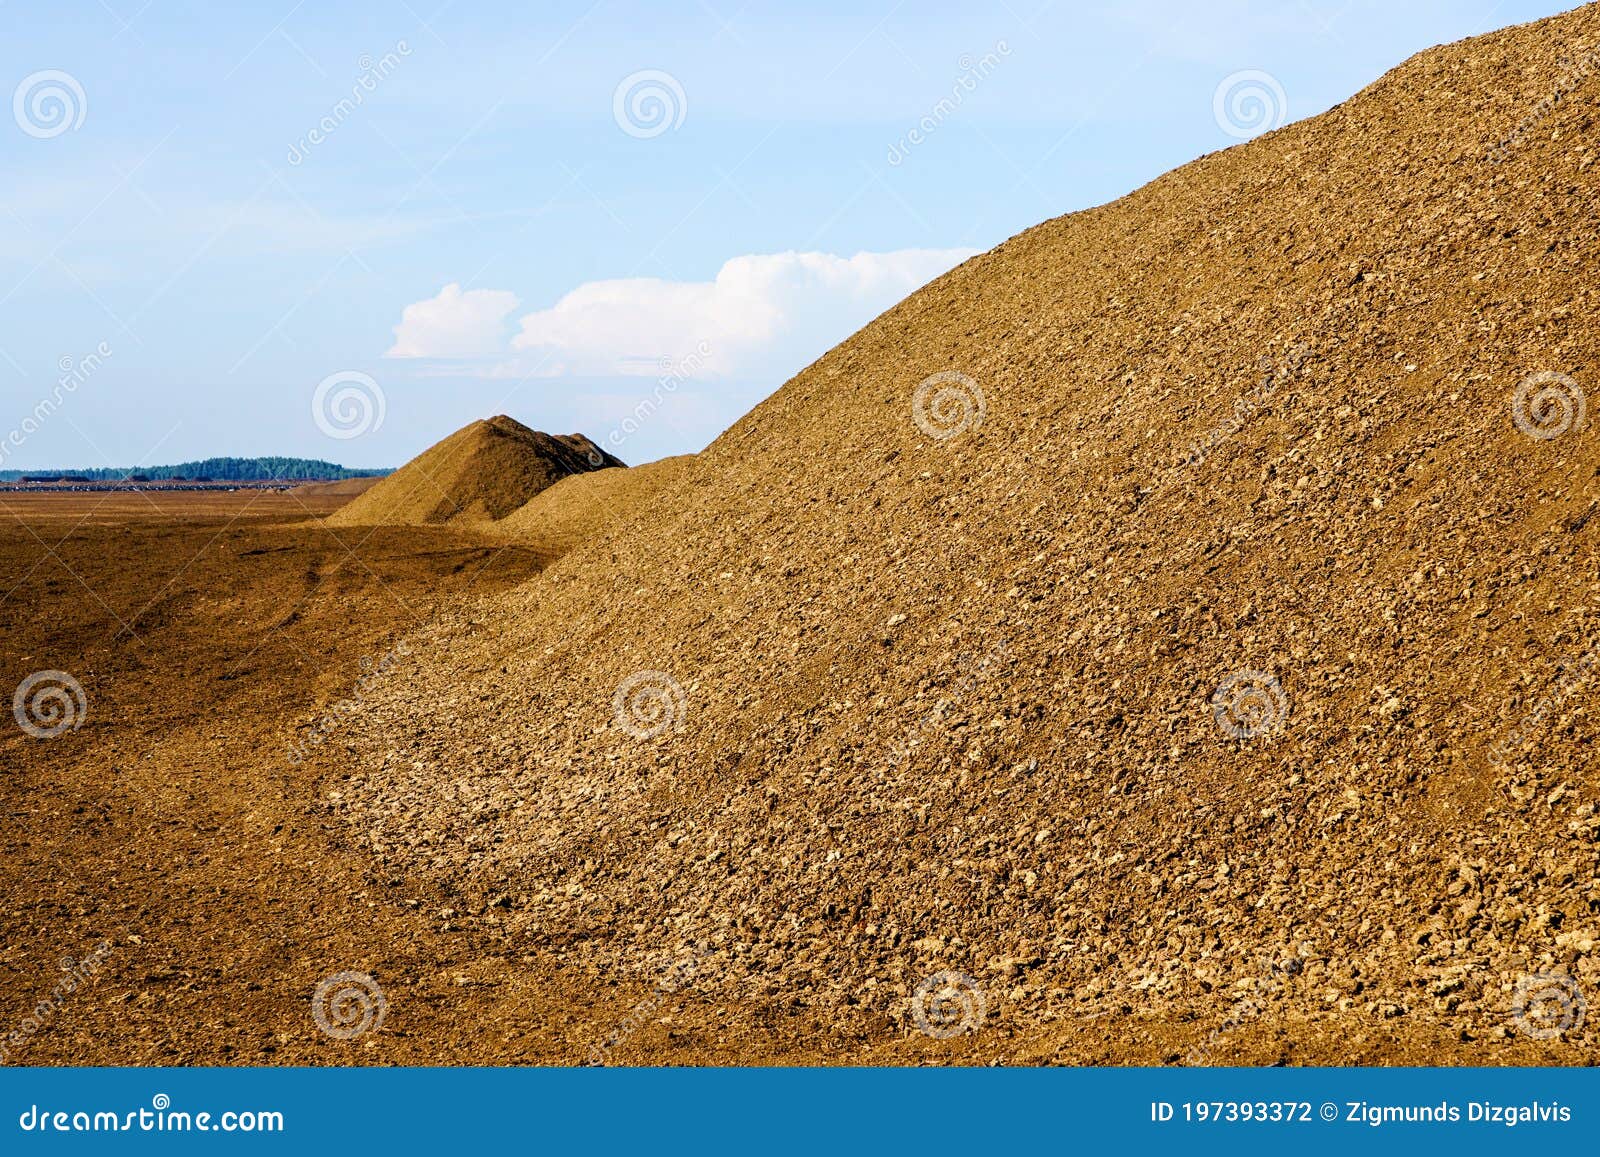 Commercial Peat Extraction Area in a Bog Landscape Stock Photo - Image ...